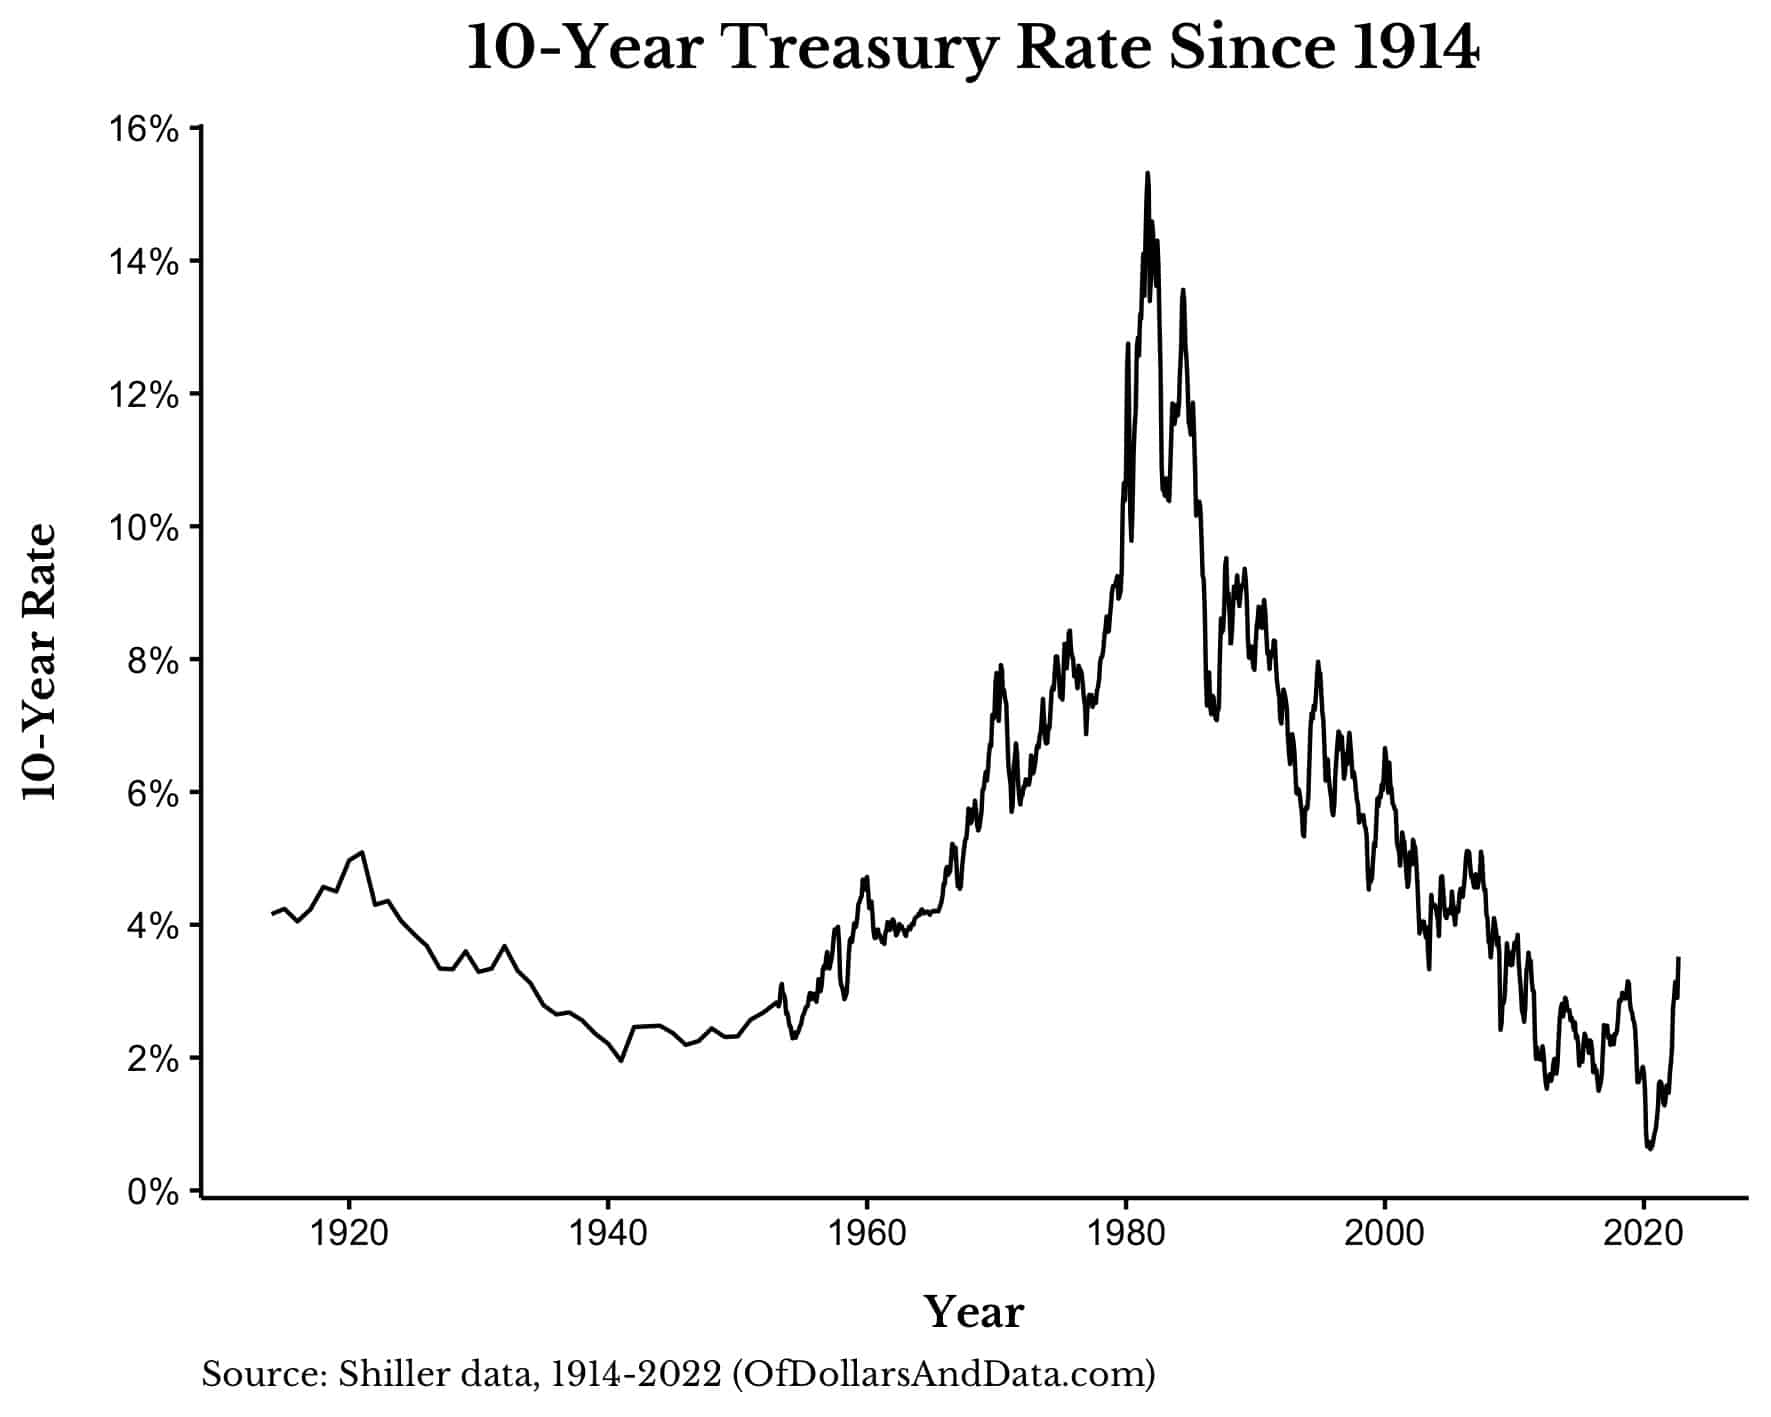 The 10-Year Treasury Rate since 1914.